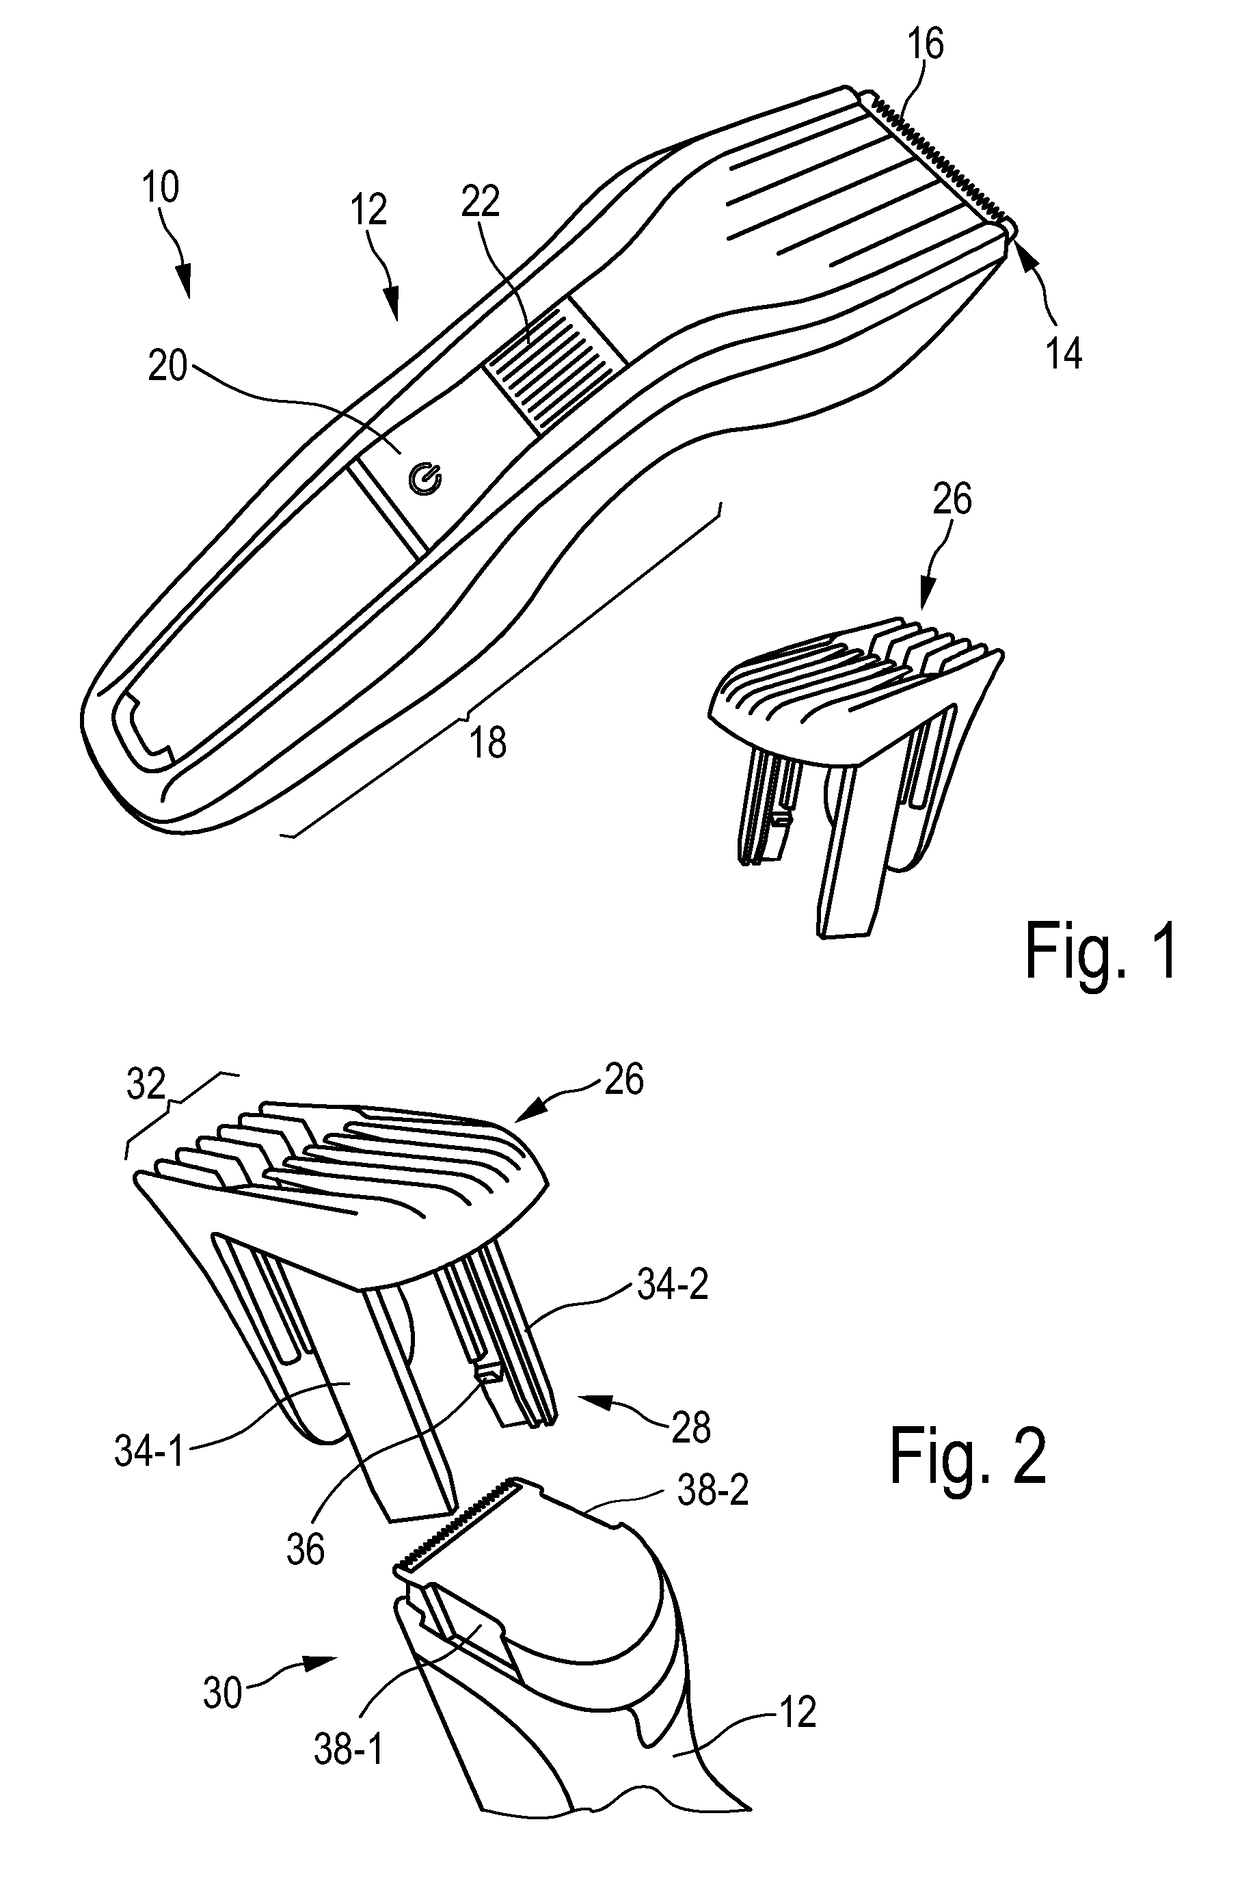 Adjustable spacing comb, adkustment drive and hair cutting appliance